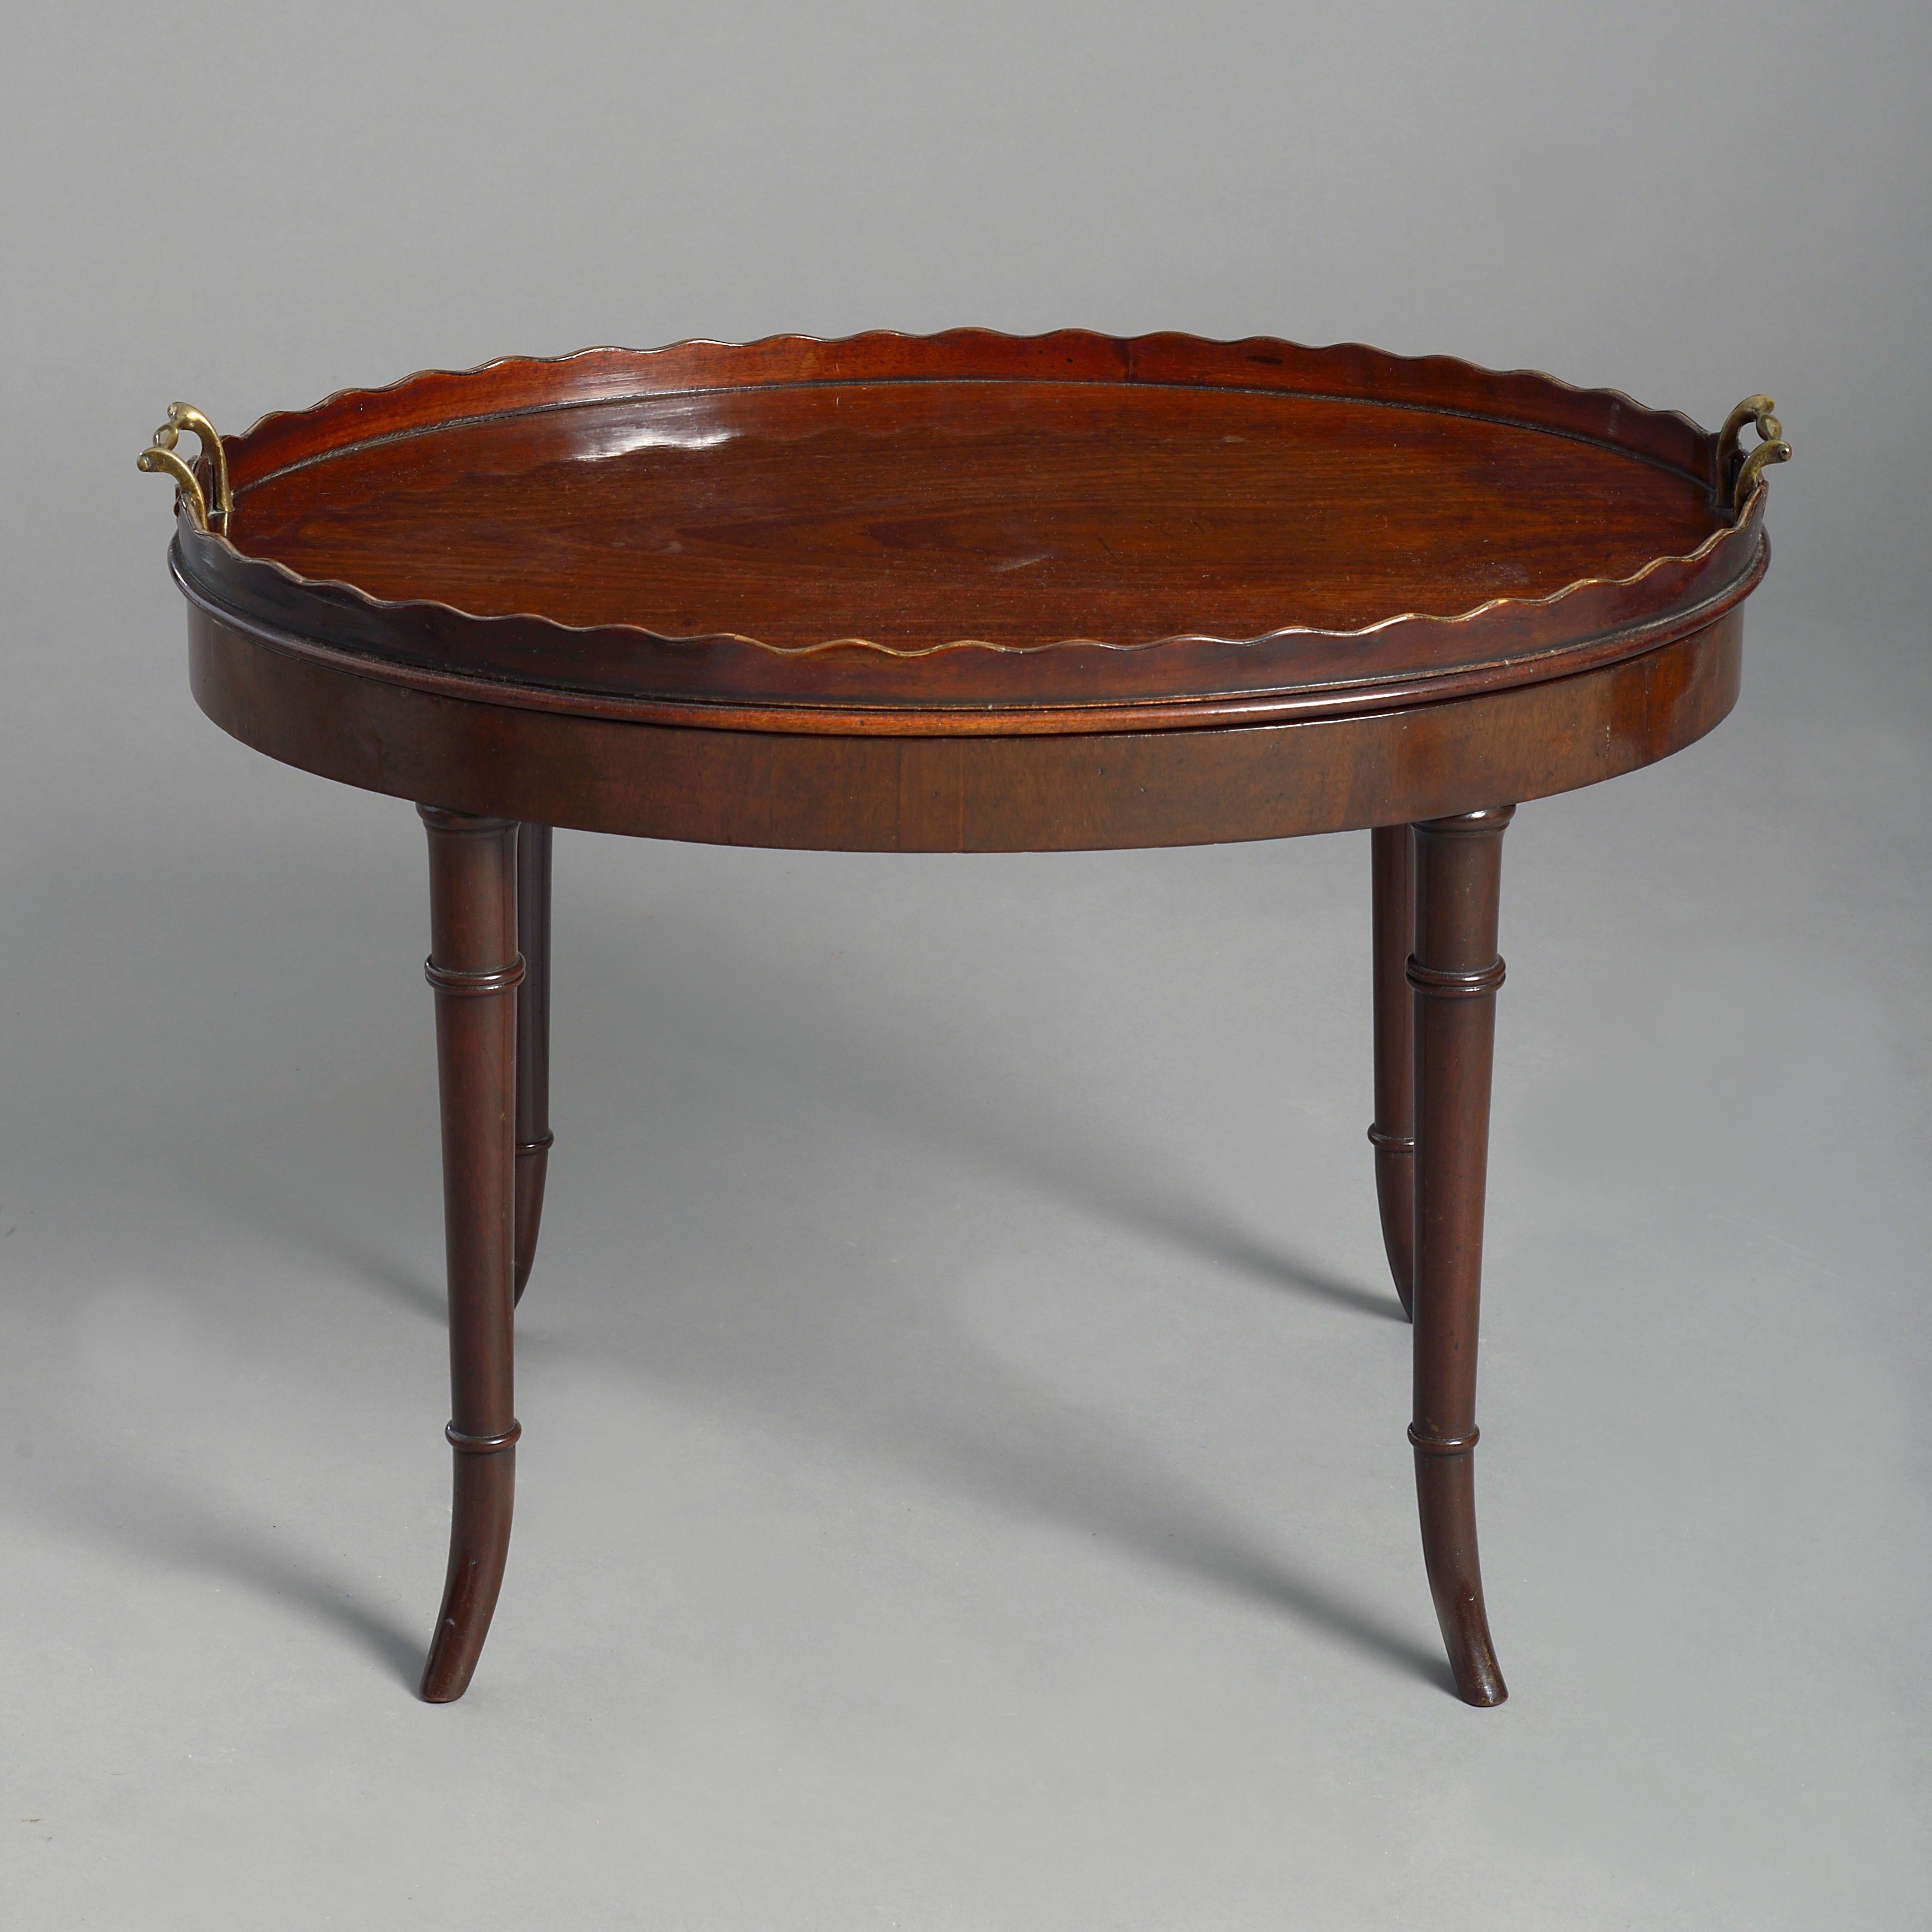 English Early 19th Century George III Period Mahogany Tray as a Low Table